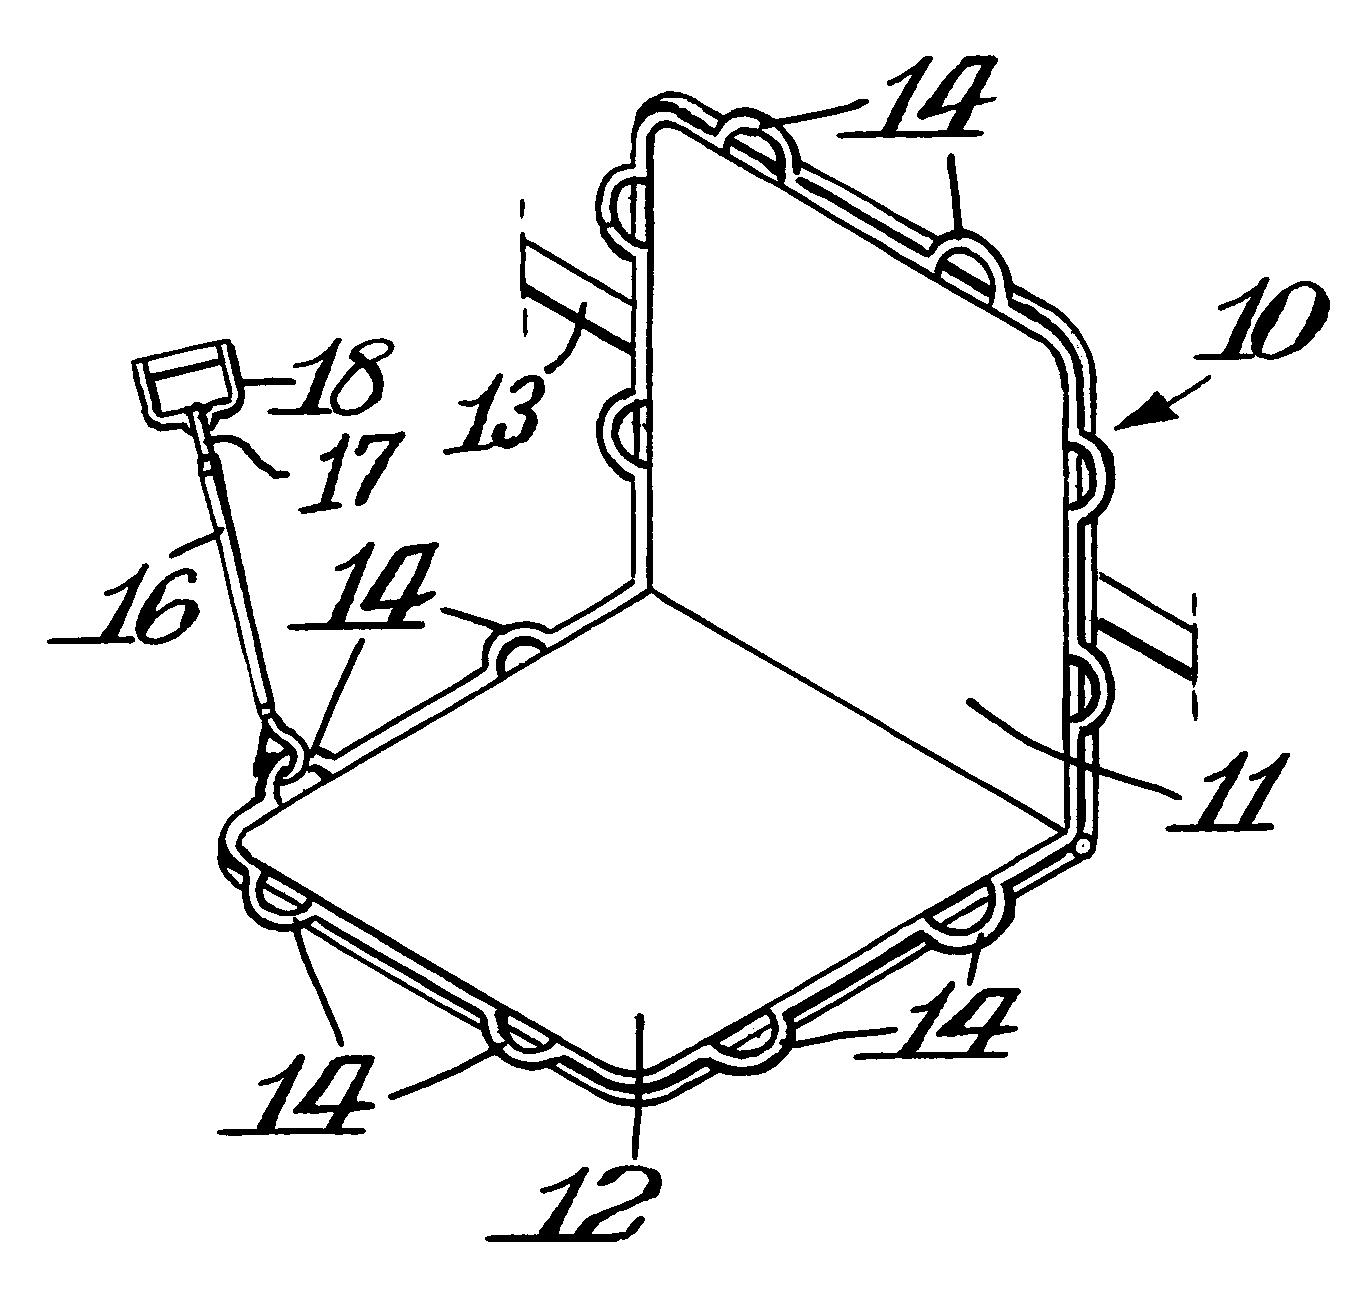 Seat exercise device